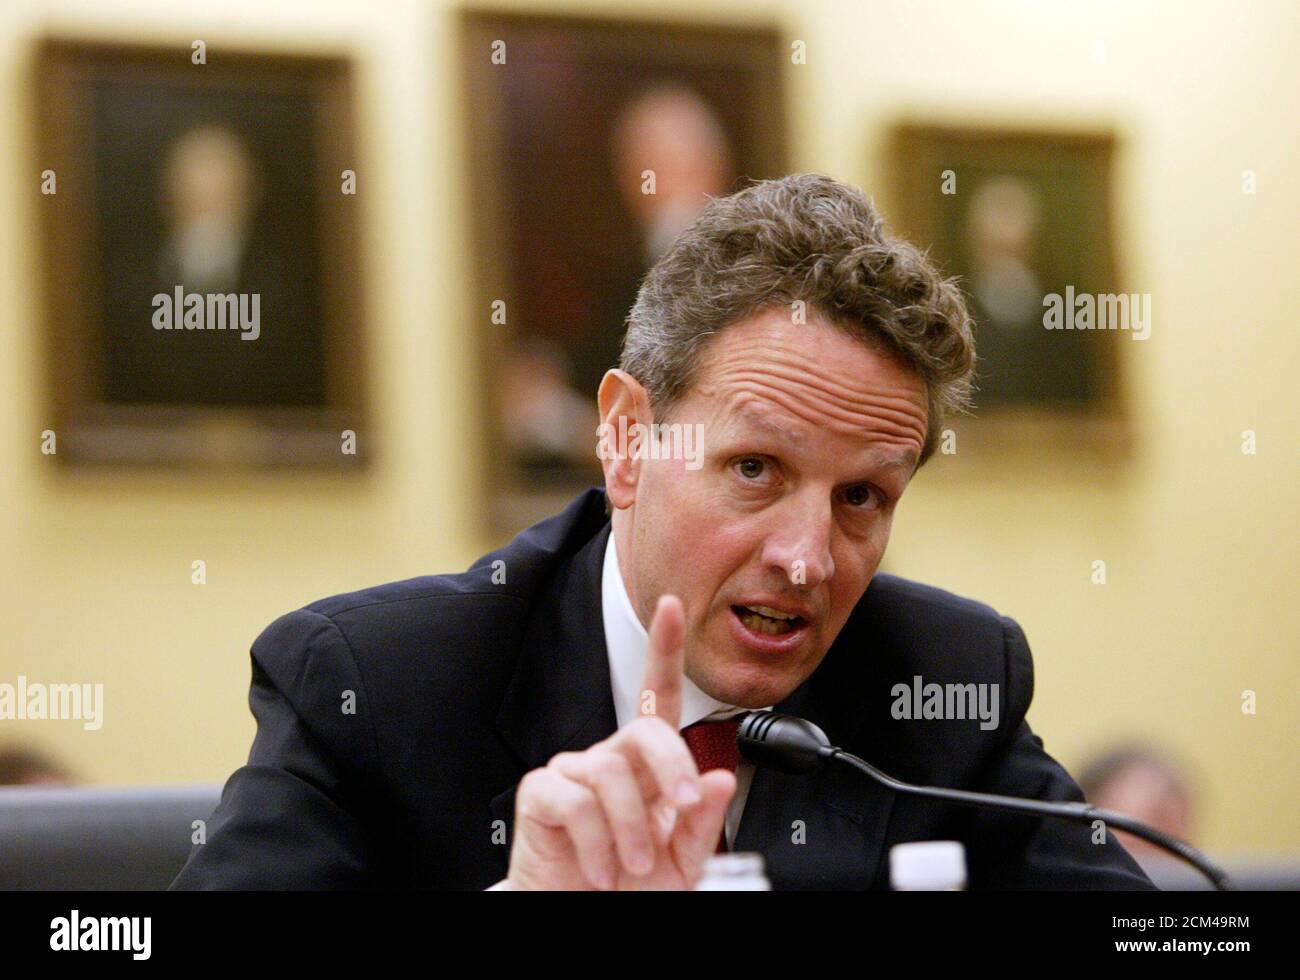 U.S. Treasury Secretary Timothy Geithner testifies about the Obama administration's budget proposals and goals for economic recovery and reform before the House Appropriations Subcommittee on General Government and Financial Services on Capitol Hill in Washington, May 21, 2009. Geithner said that a bailout for banks was steadying the financial system but care must be taken to ensure that normal market forces are allowed to operate.  REUTERS/Jim Bourg   (UNITED STATES POLITICS BUSINESS) Stock Photo